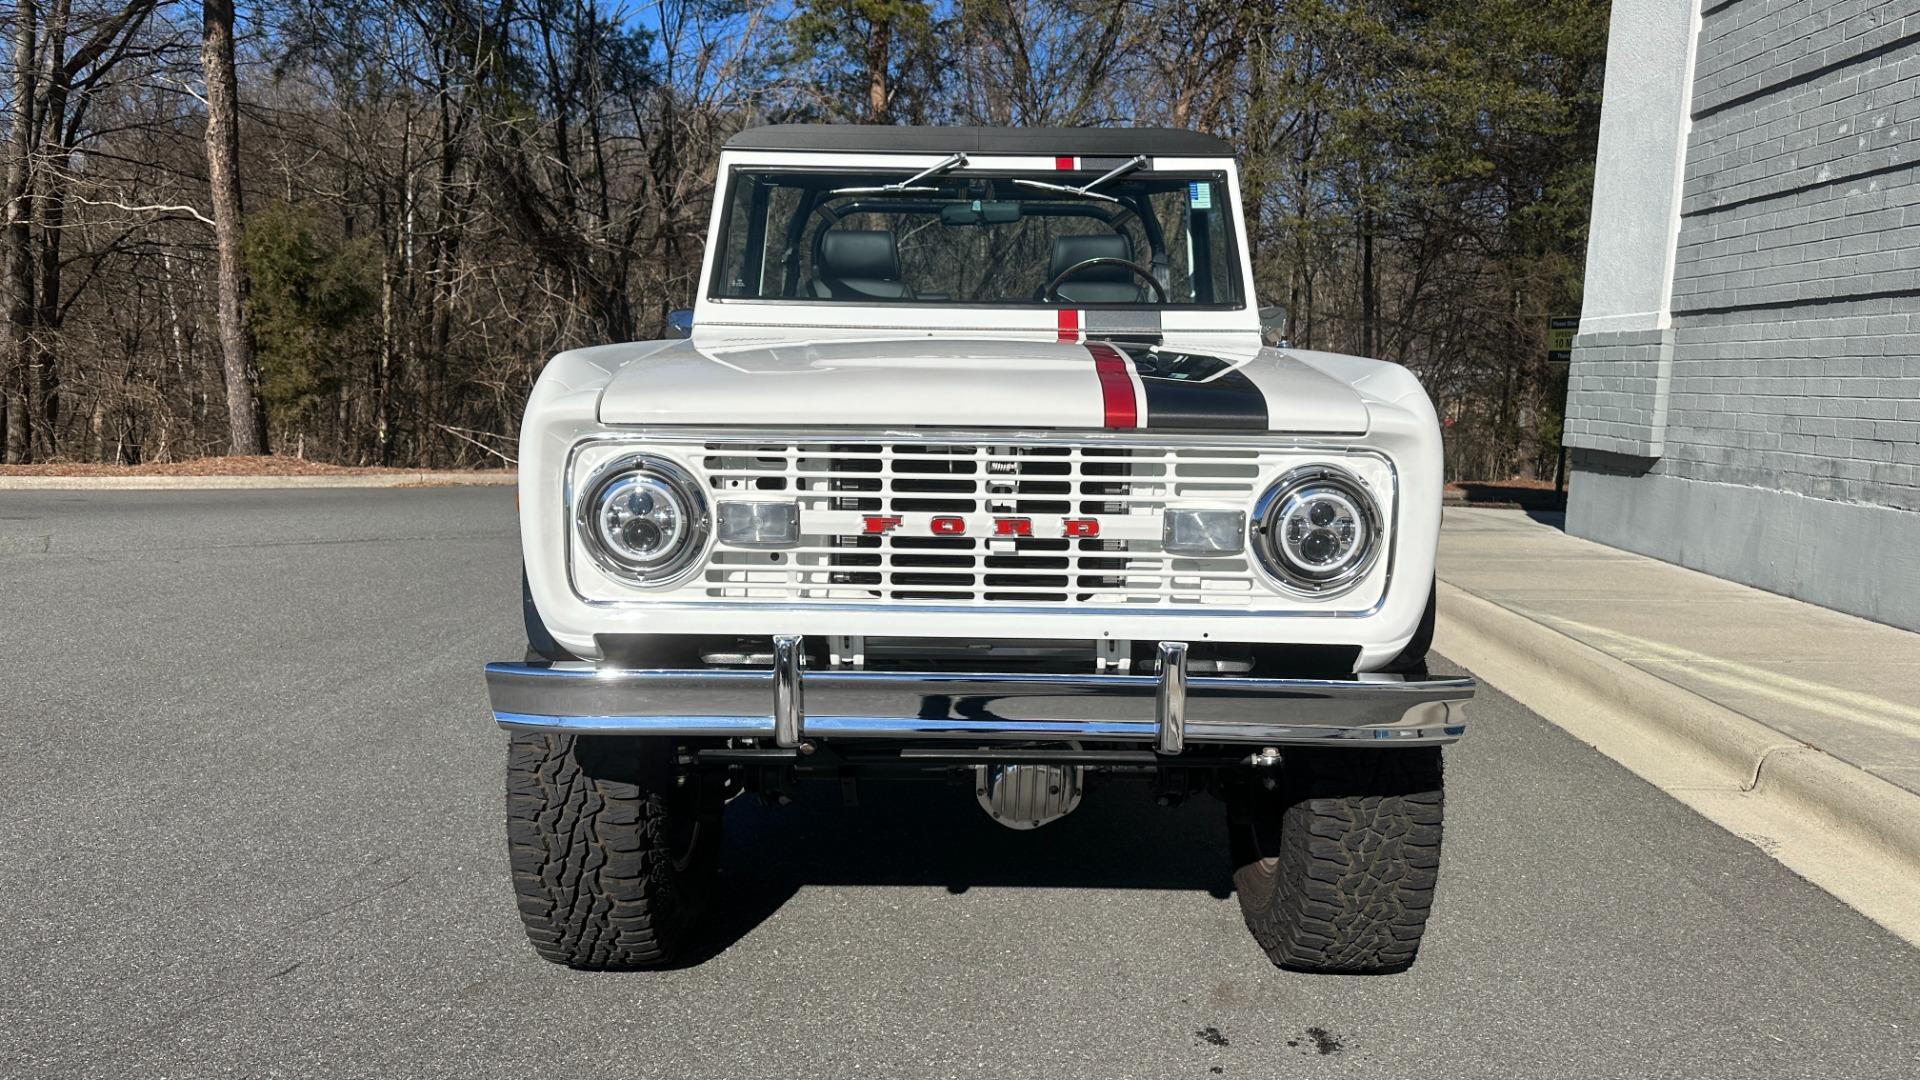 Used 1977 Ford Bronco GATEWAY EDITION / 5.0L COYOTE V8 / FRAME OFF RESTORATION / LEATHER / A/C for sale $225,000 at Formula Imports in Charlotte NC 28227 8